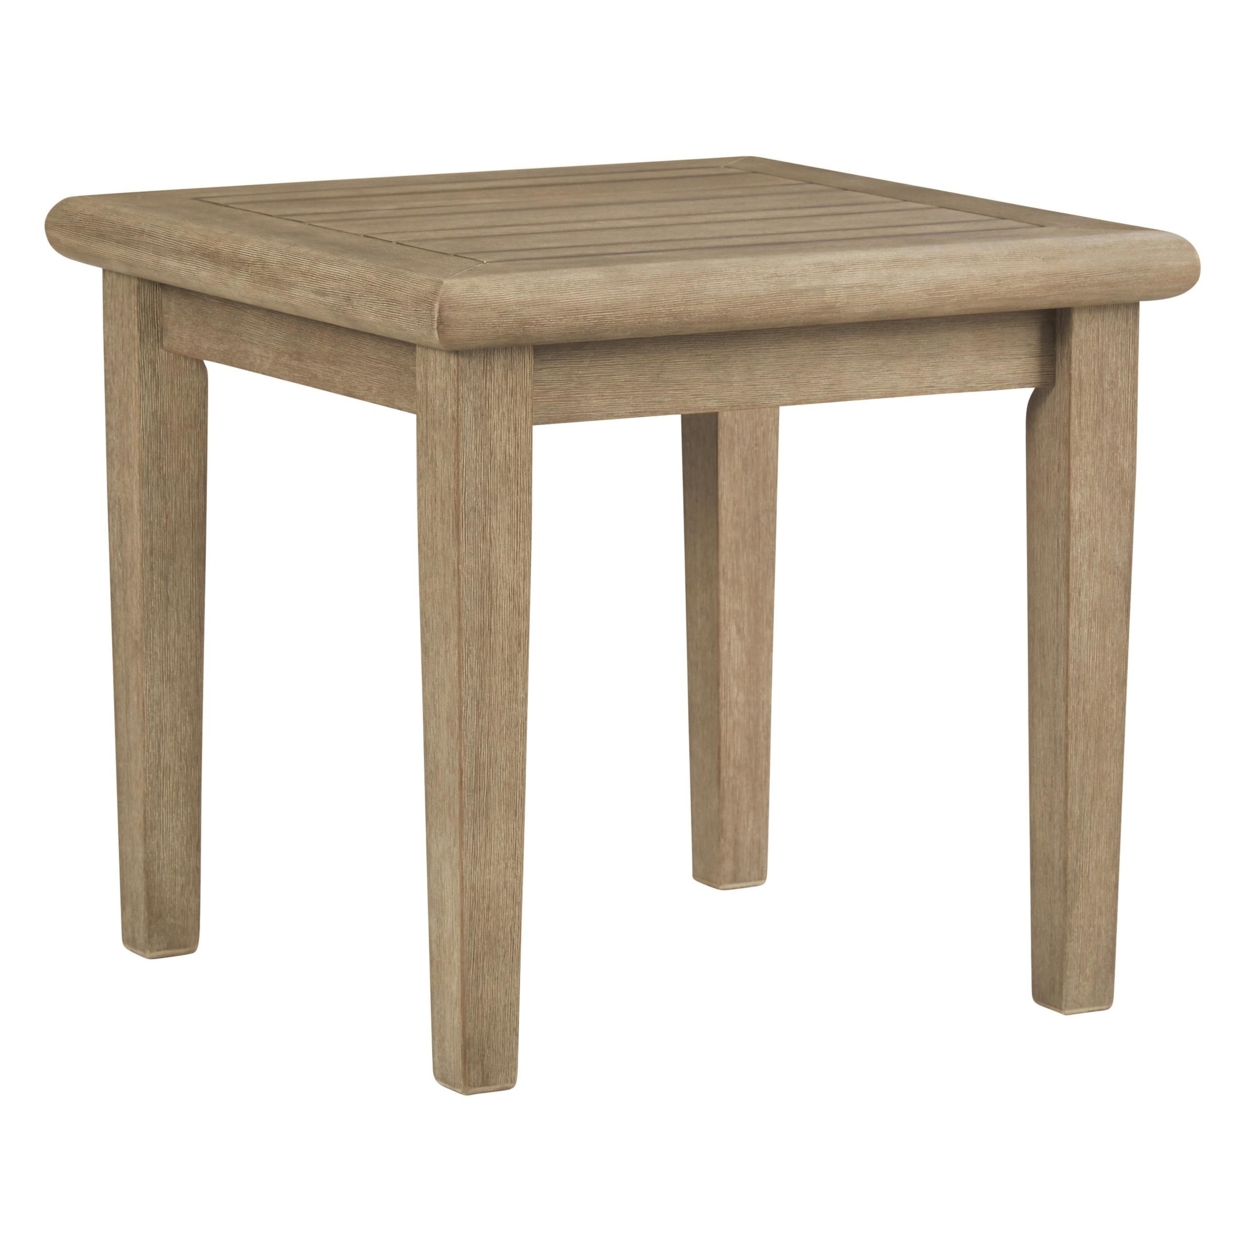 Square Wooden Frame End Table With Plank Tabletop, Teak Brown- Saltoro Sherpi